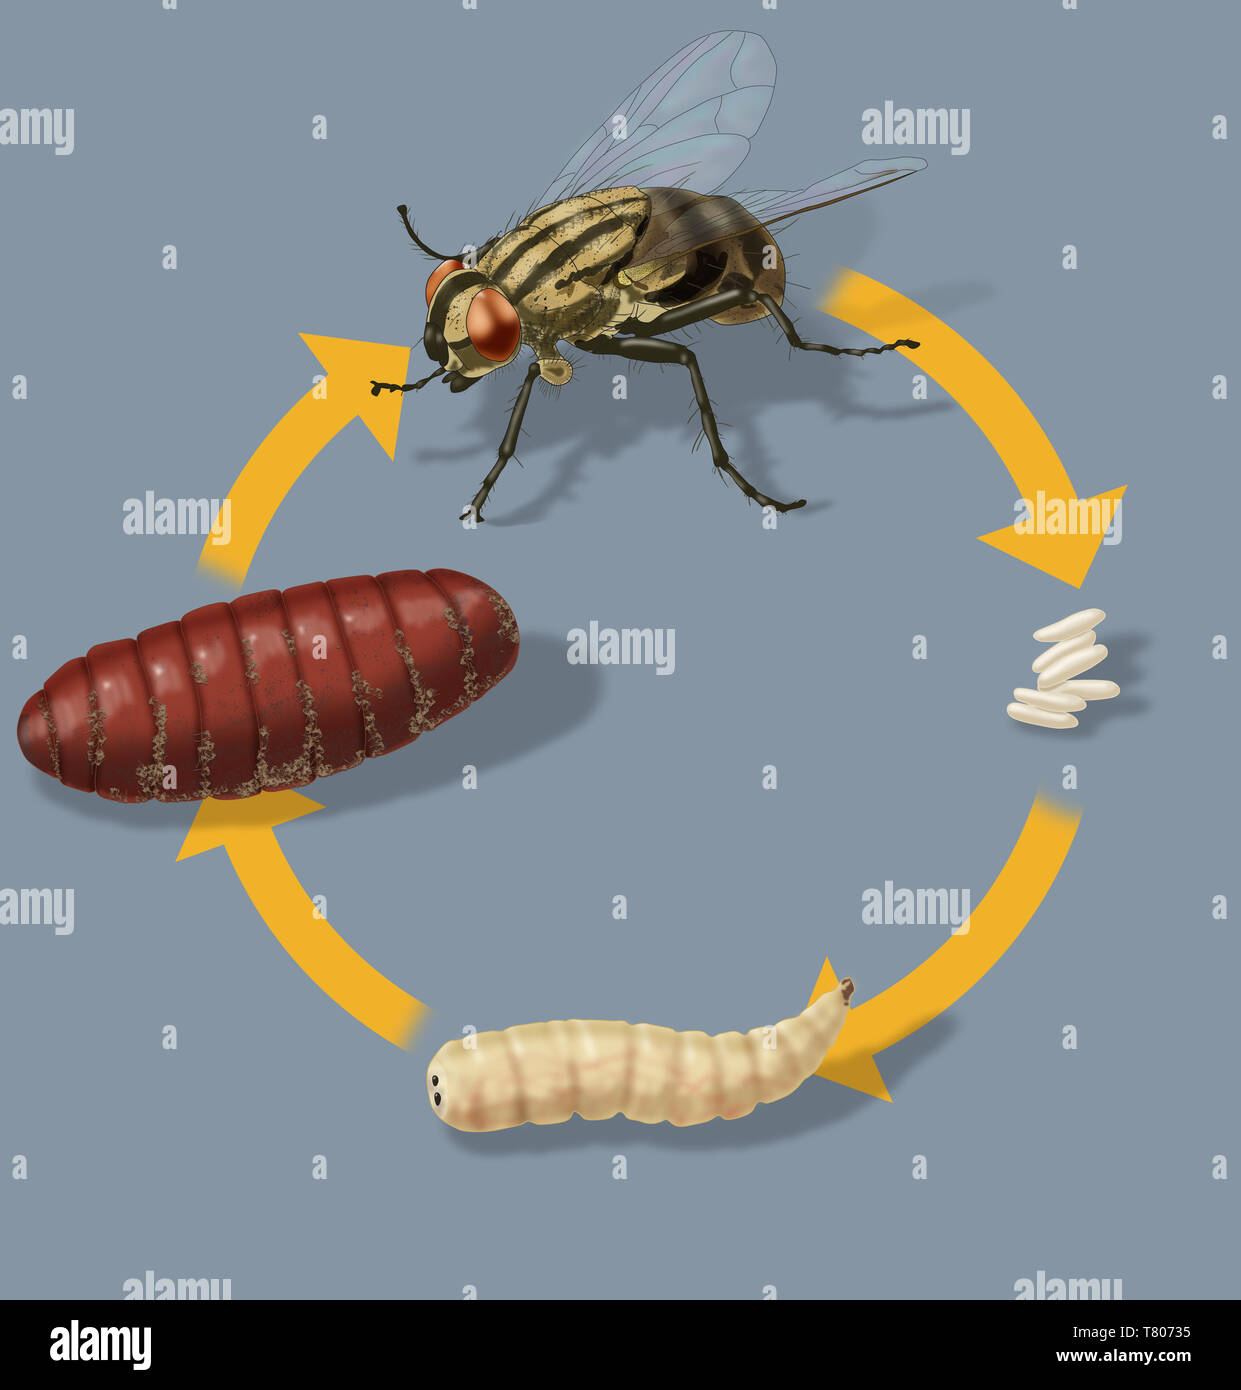 Life Cycle of a House Fly, Illustration Stock Photo